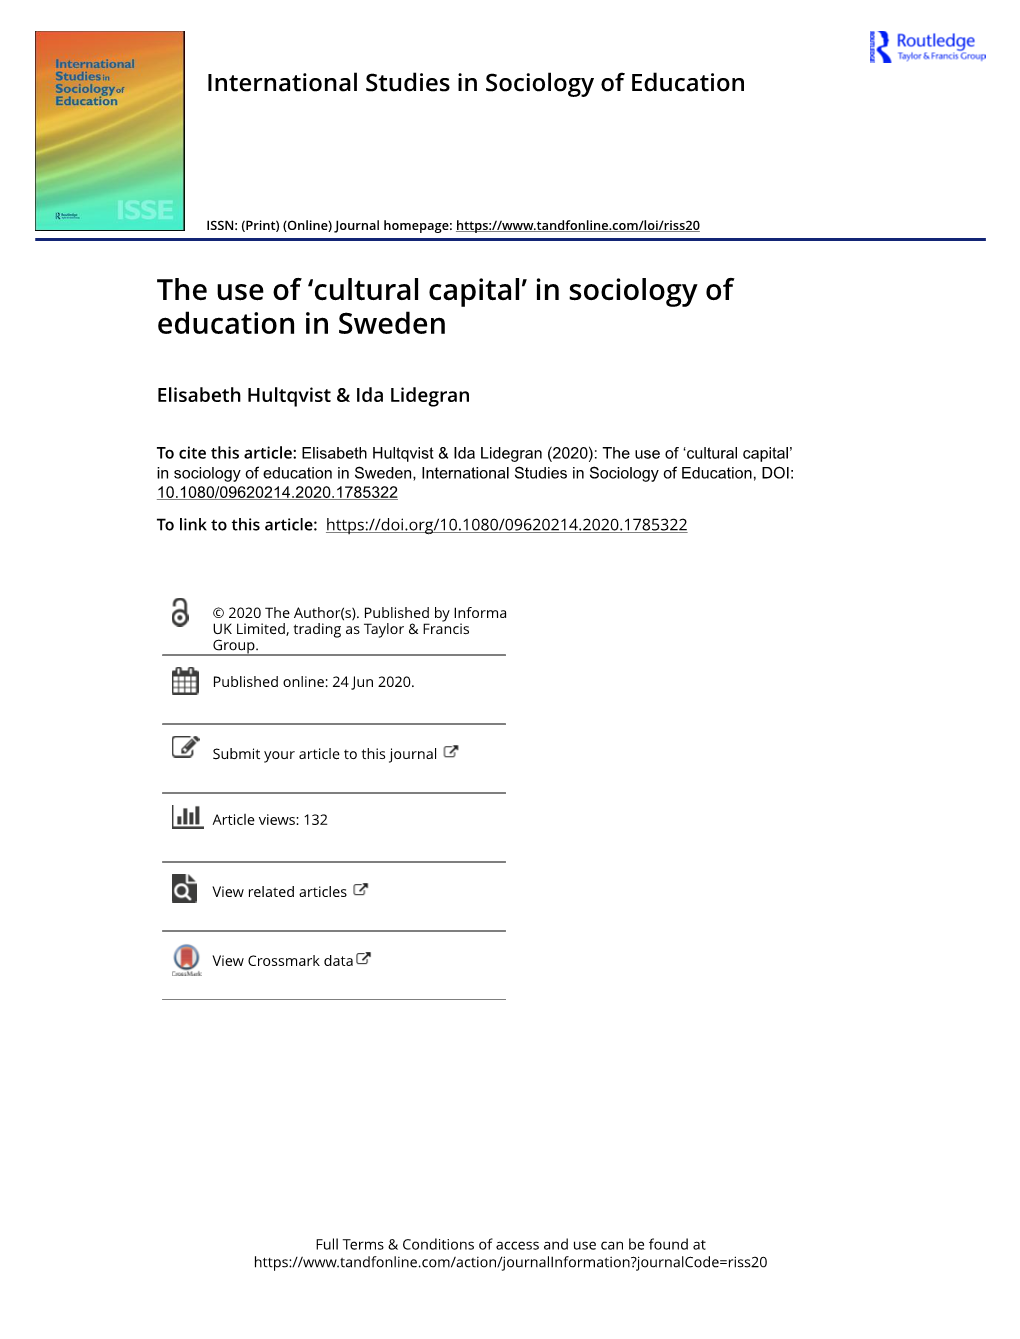 'Cultural Capital' in Sociology of Education in Sweden